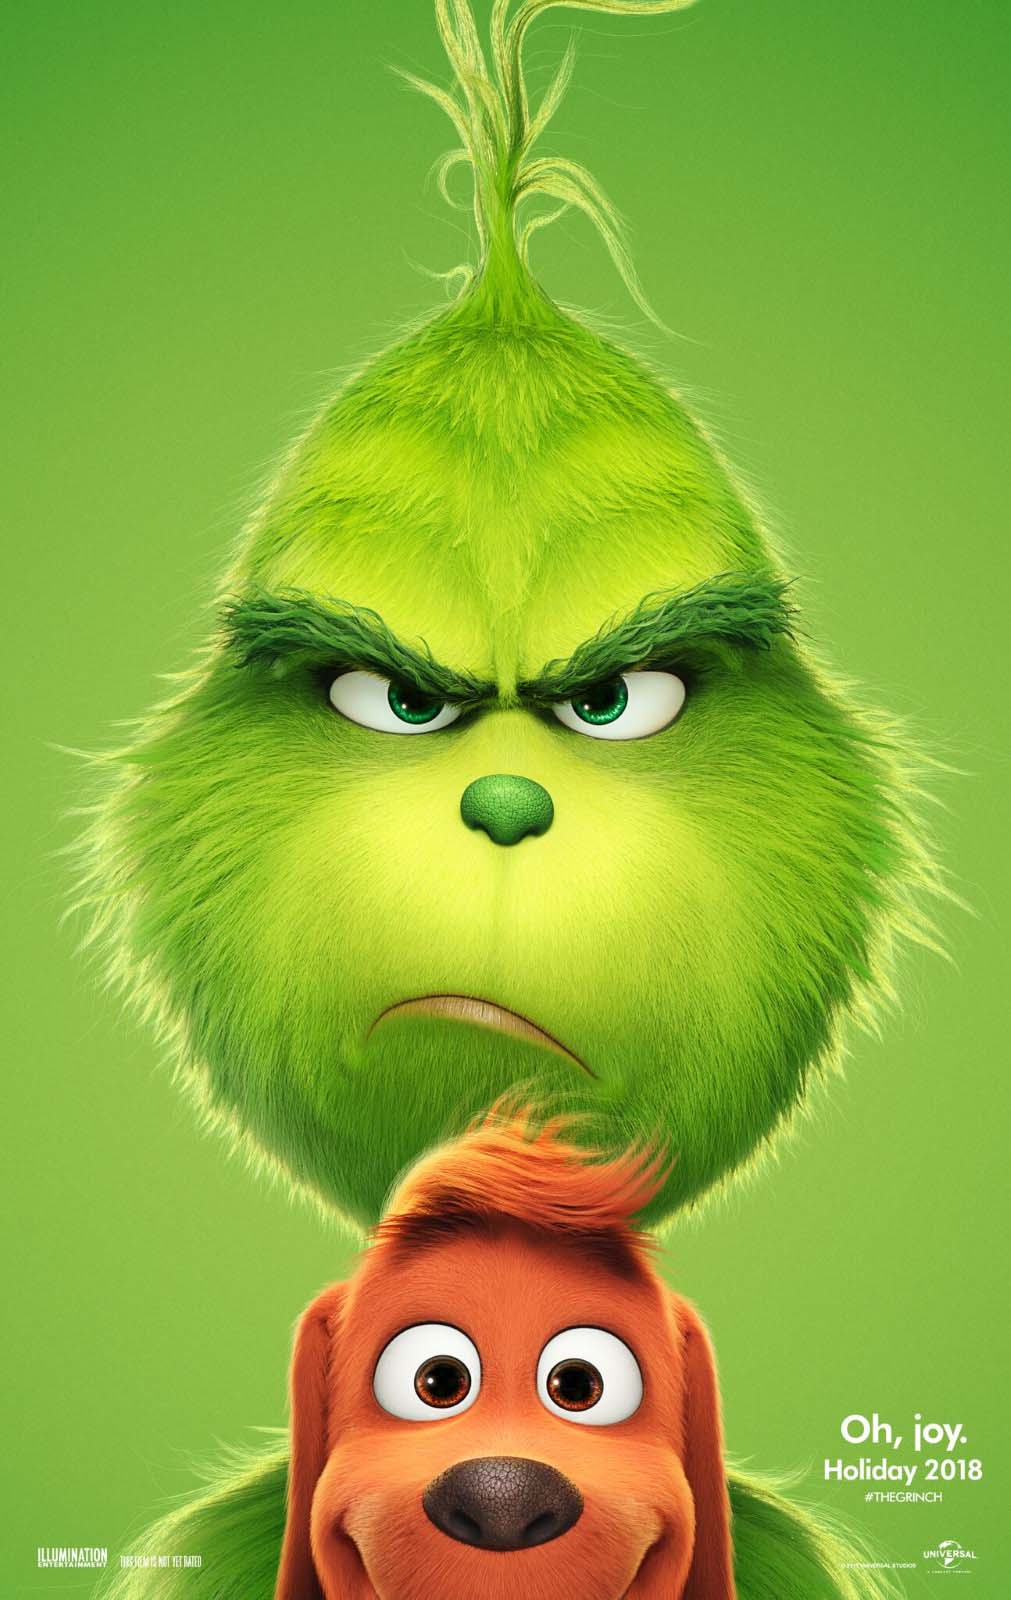 The Grinch 2018 Full Movie Free Online